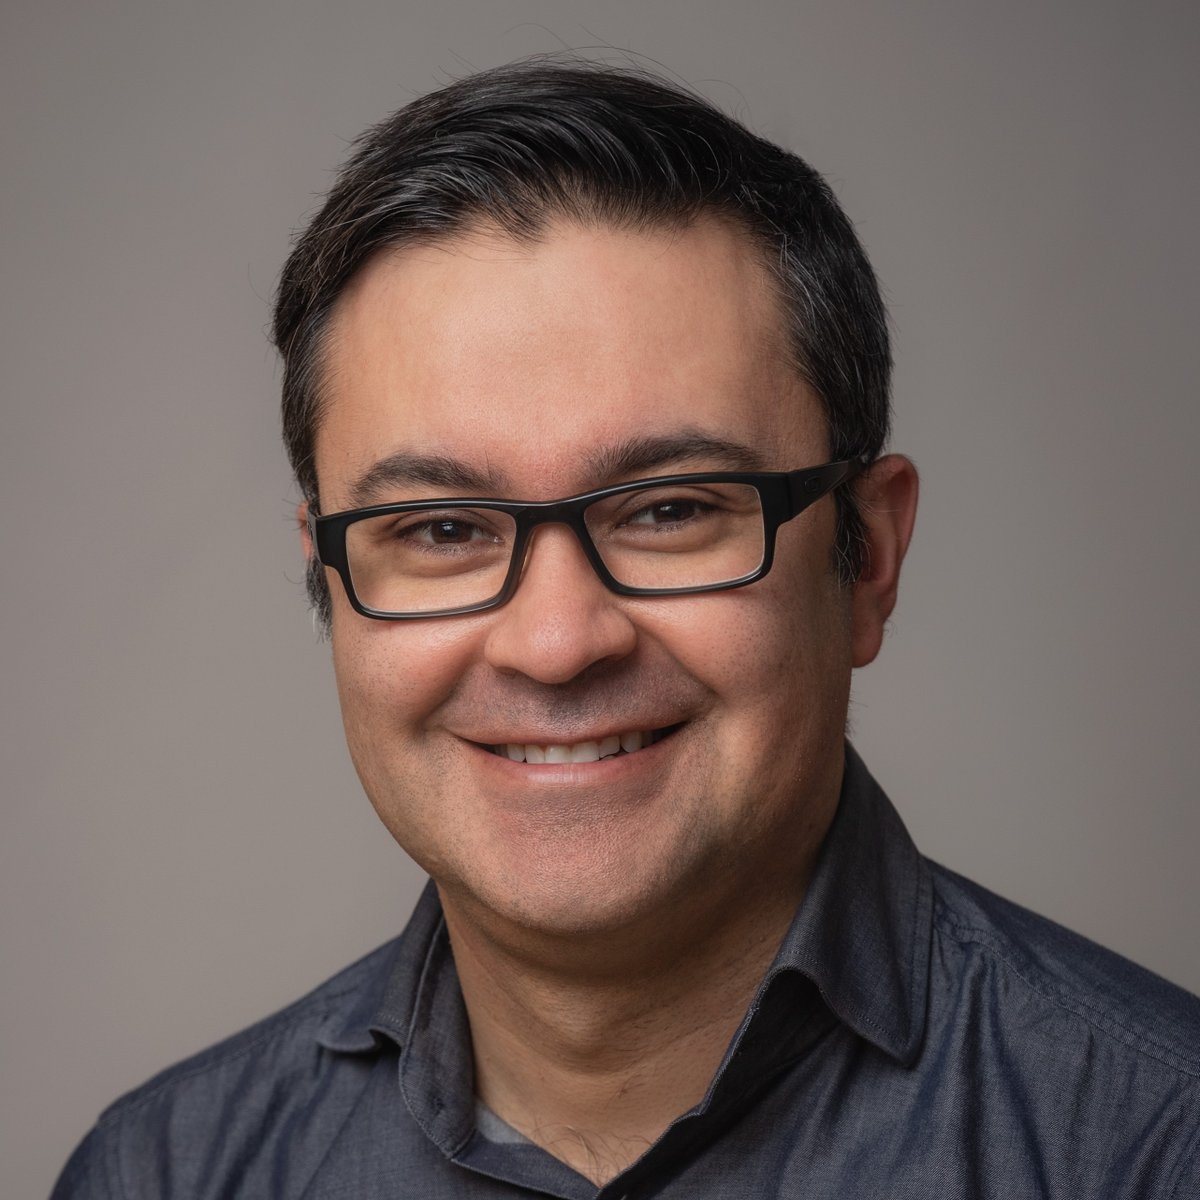 Congratulations to José Rodriguez Nύñez, Associate Professor Teaching, for receiving the 2022 Faculty of Science Excellence in Service Award! These awards recognize those who have demonstrated outstanding achievements beyond their regular work. More info: ow.ly/QhHN50MlH0c